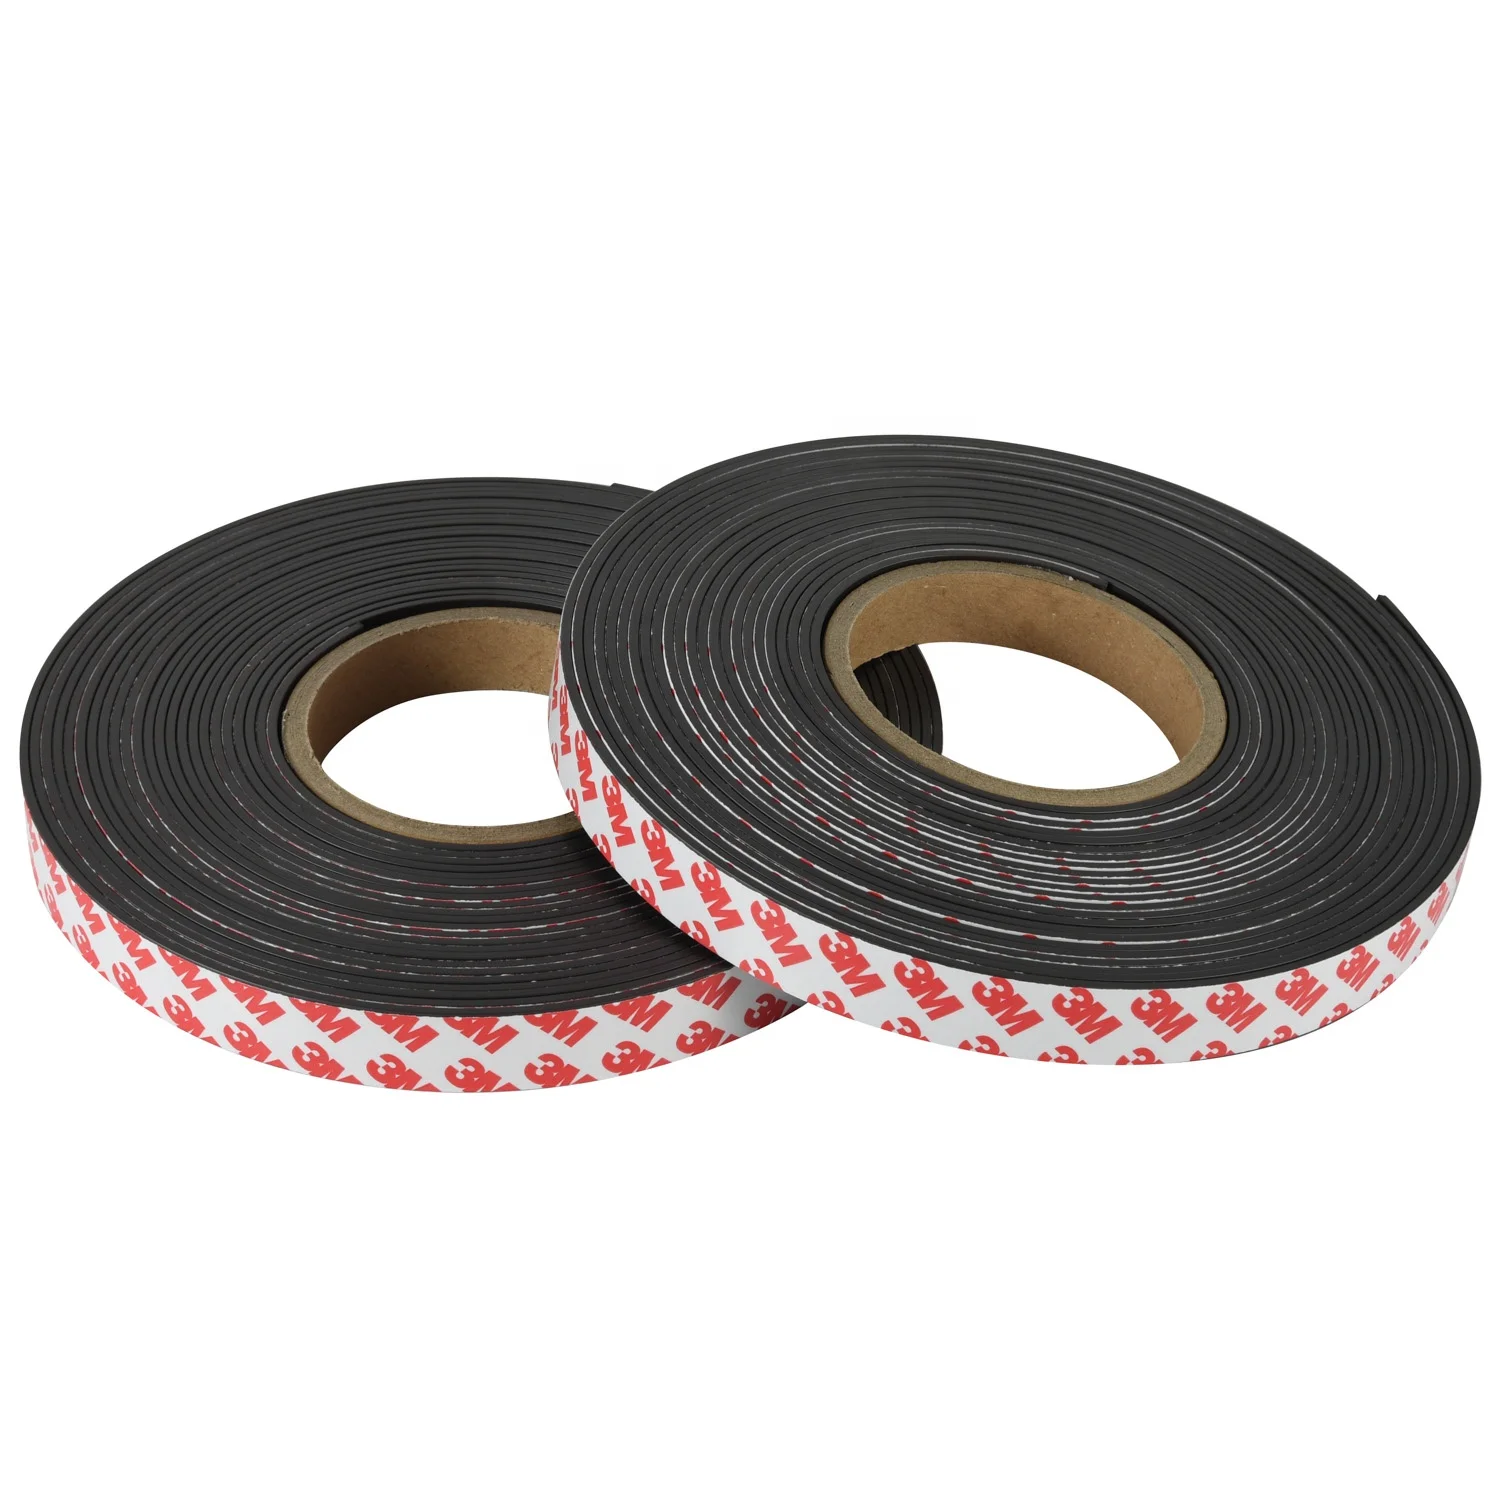 3M Flexible Magnetic Tape Rubber Magnetic Stripe Tape With Strong Self Adhesive (60817694446)